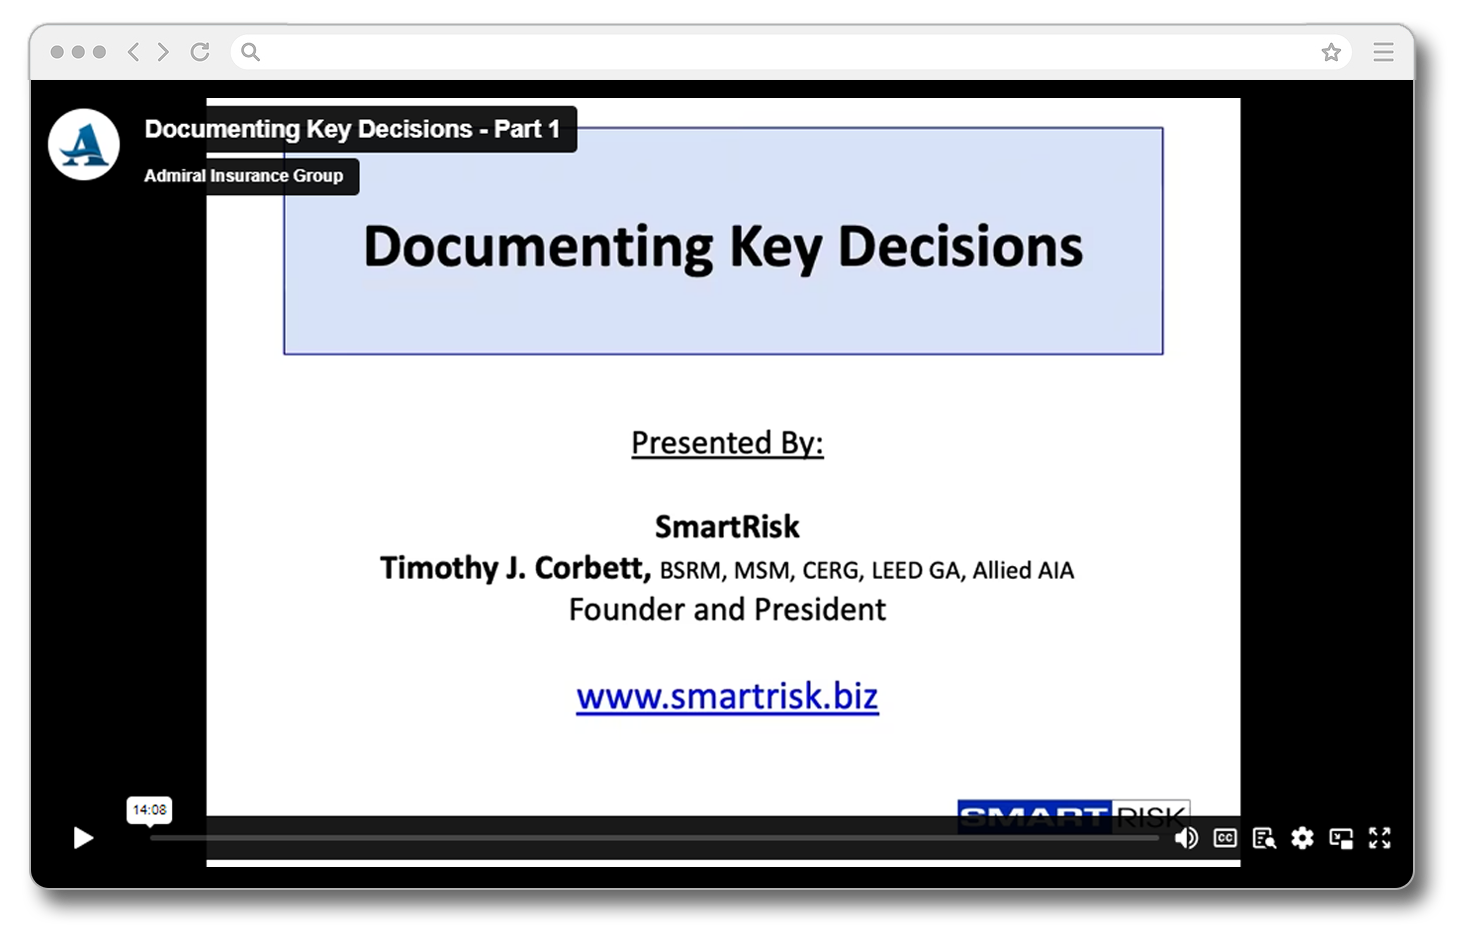 Thumbnail image of video player for the "Importance of documenting key decisions" video